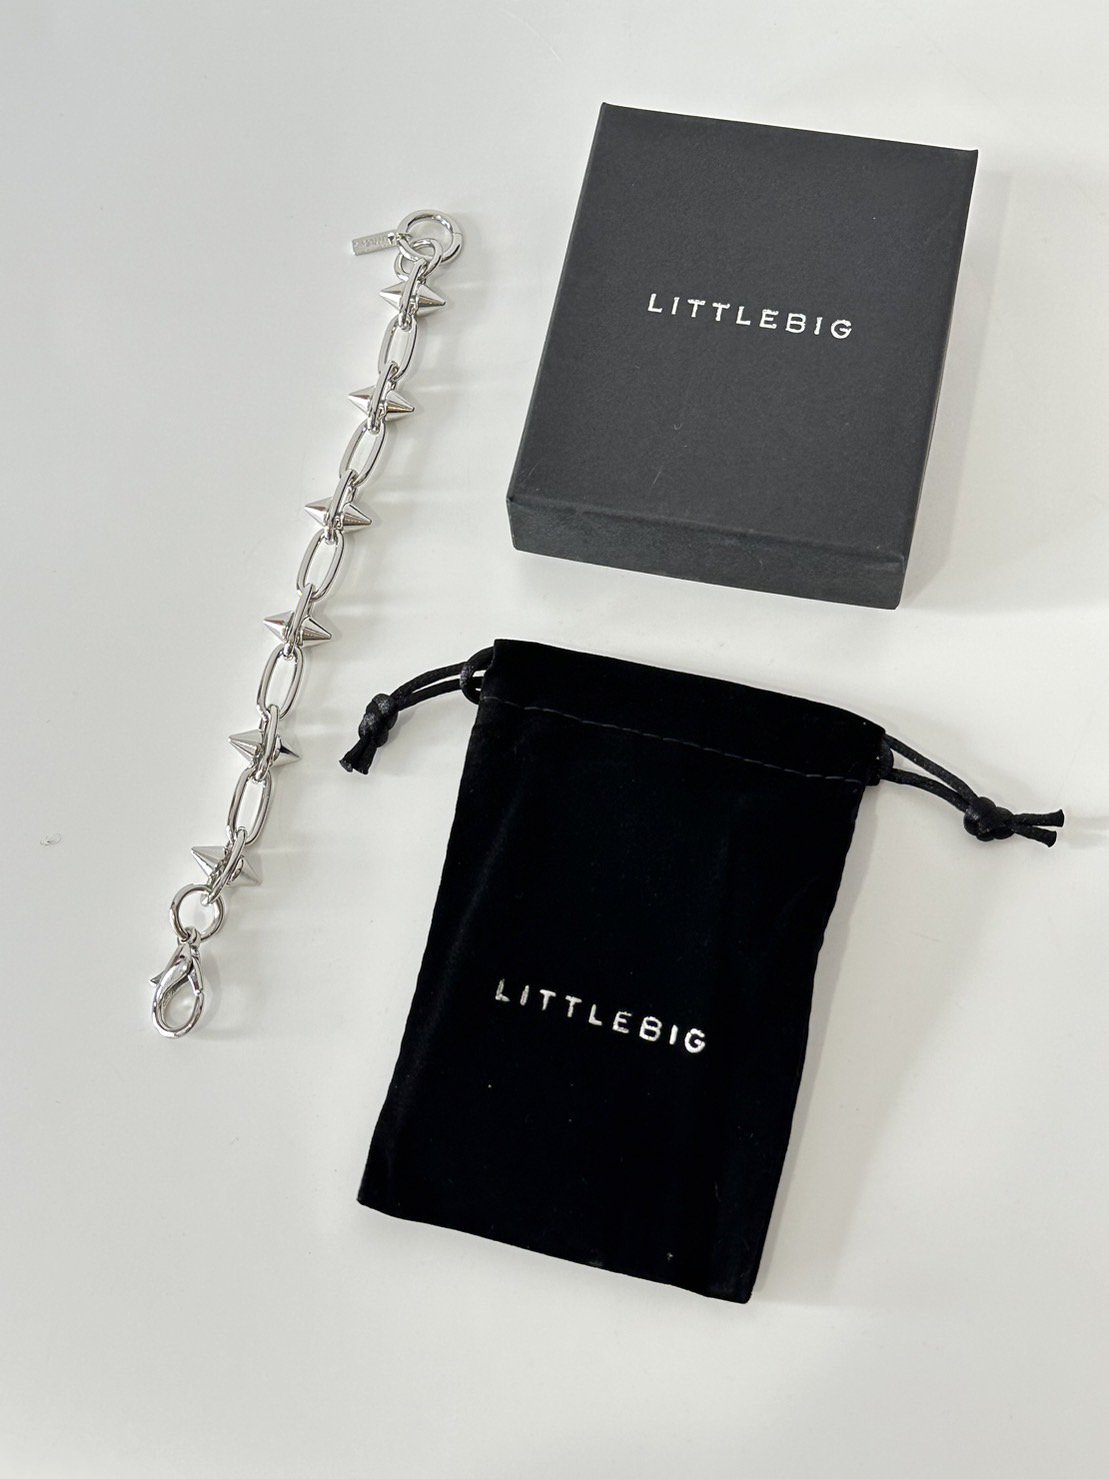 LITTLEBIG<br />Studded Bracelet / Silver<img class='new_mark_img2' src='https://img.shop-pro.jp/img/new/icons14.gif' style='border:none;display:inline;margin:0px;padding:0px;width:auto;' />